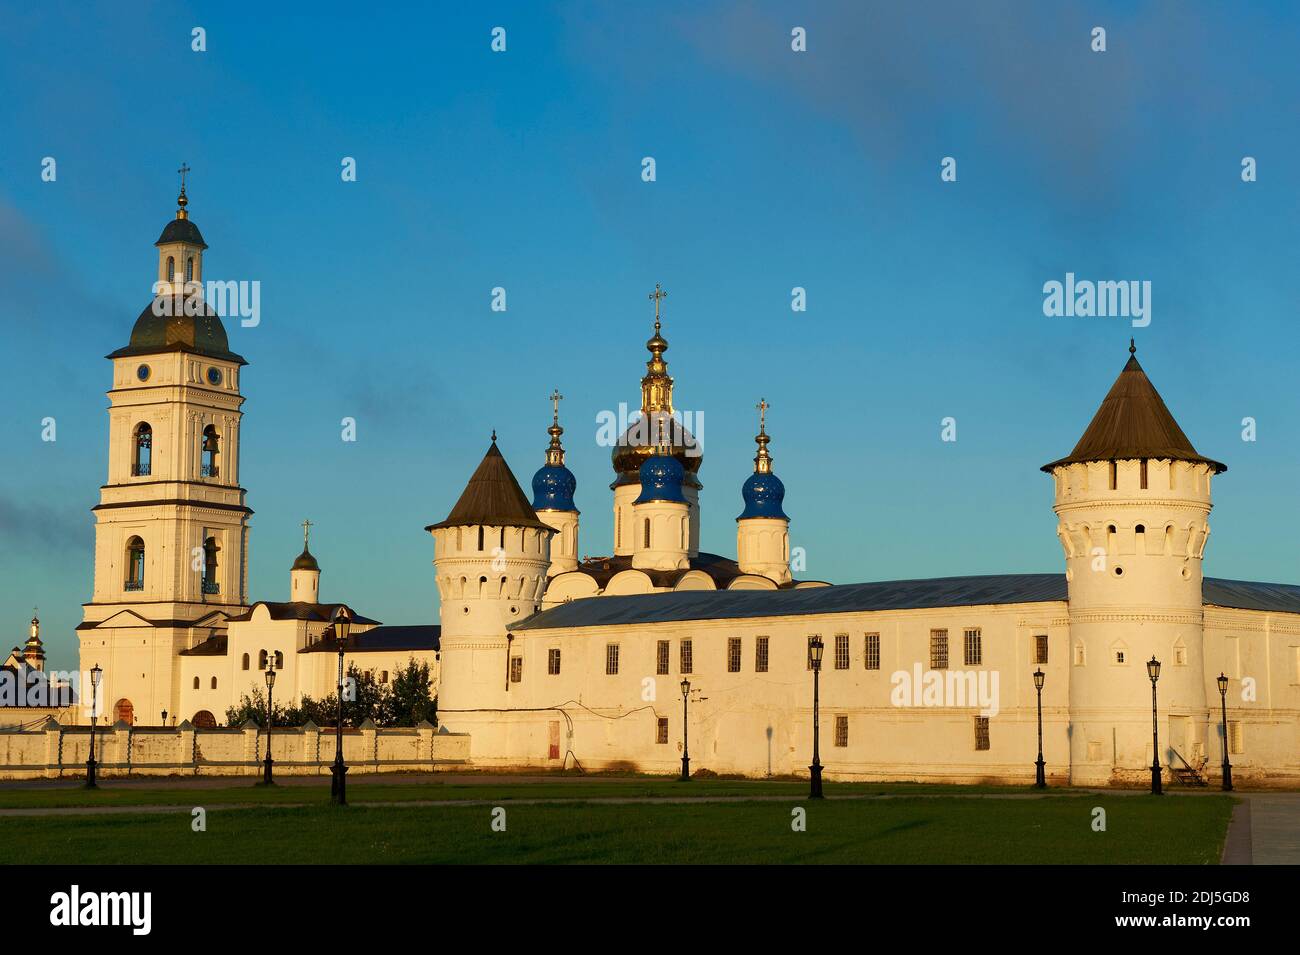 Rossiyatobolsk Siberian Fortress Stronghold Photo Background And Picture  For Free Download - Pngtree